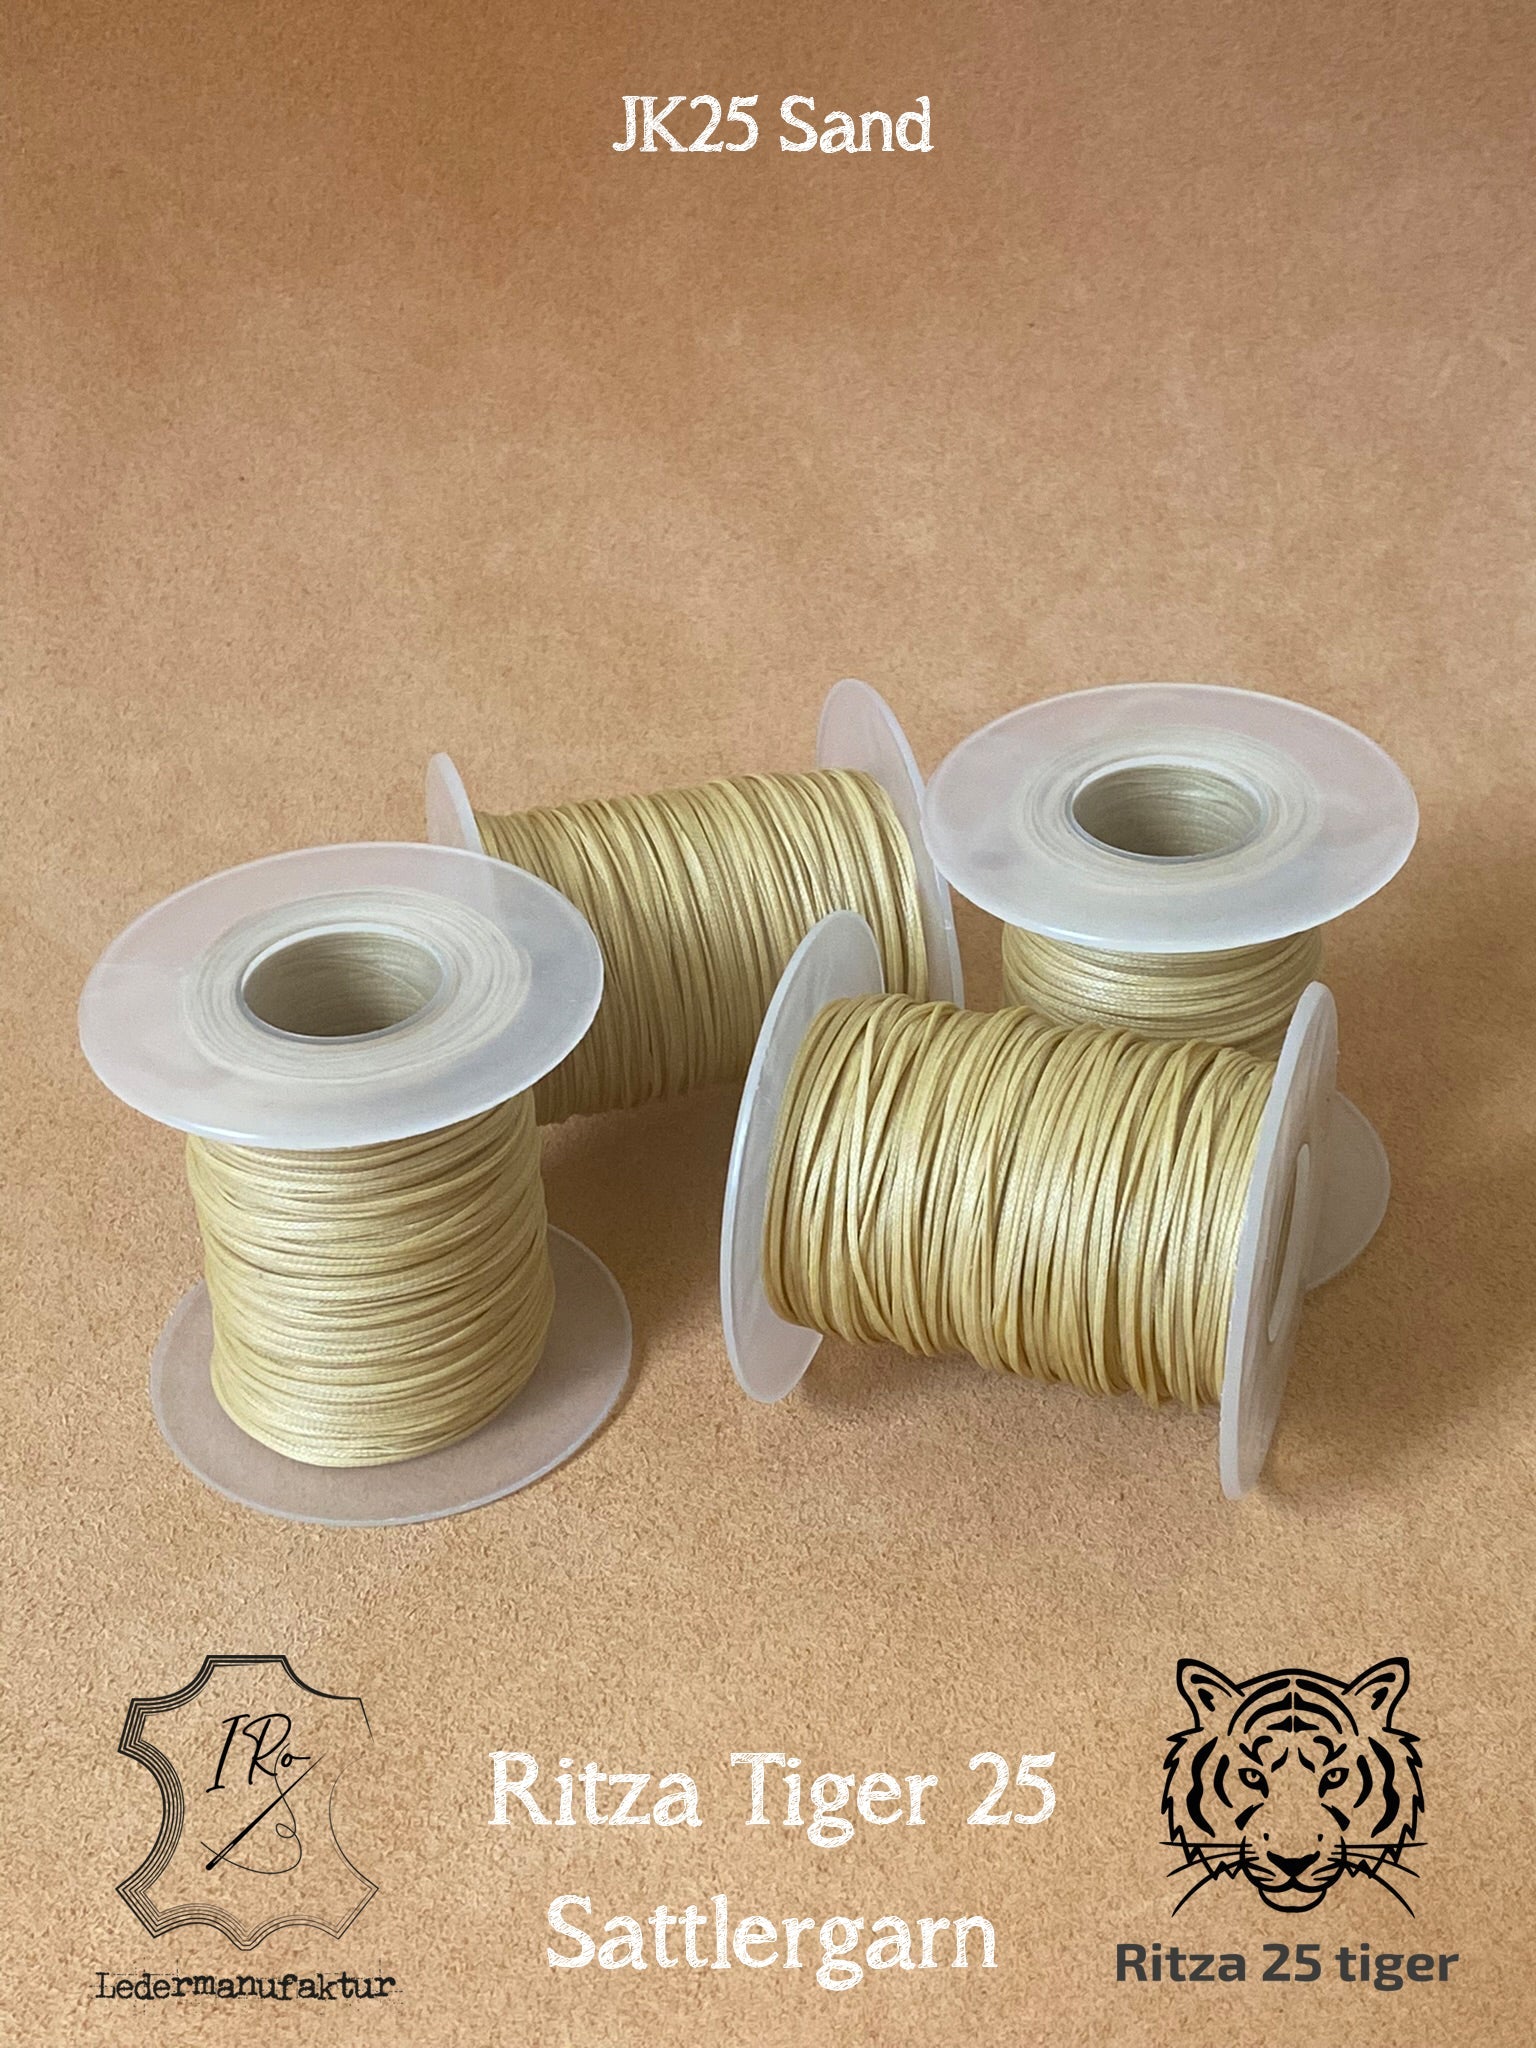 1.0mm Silver Ritza 25 Tiger Wax Thread For and 50 similar items